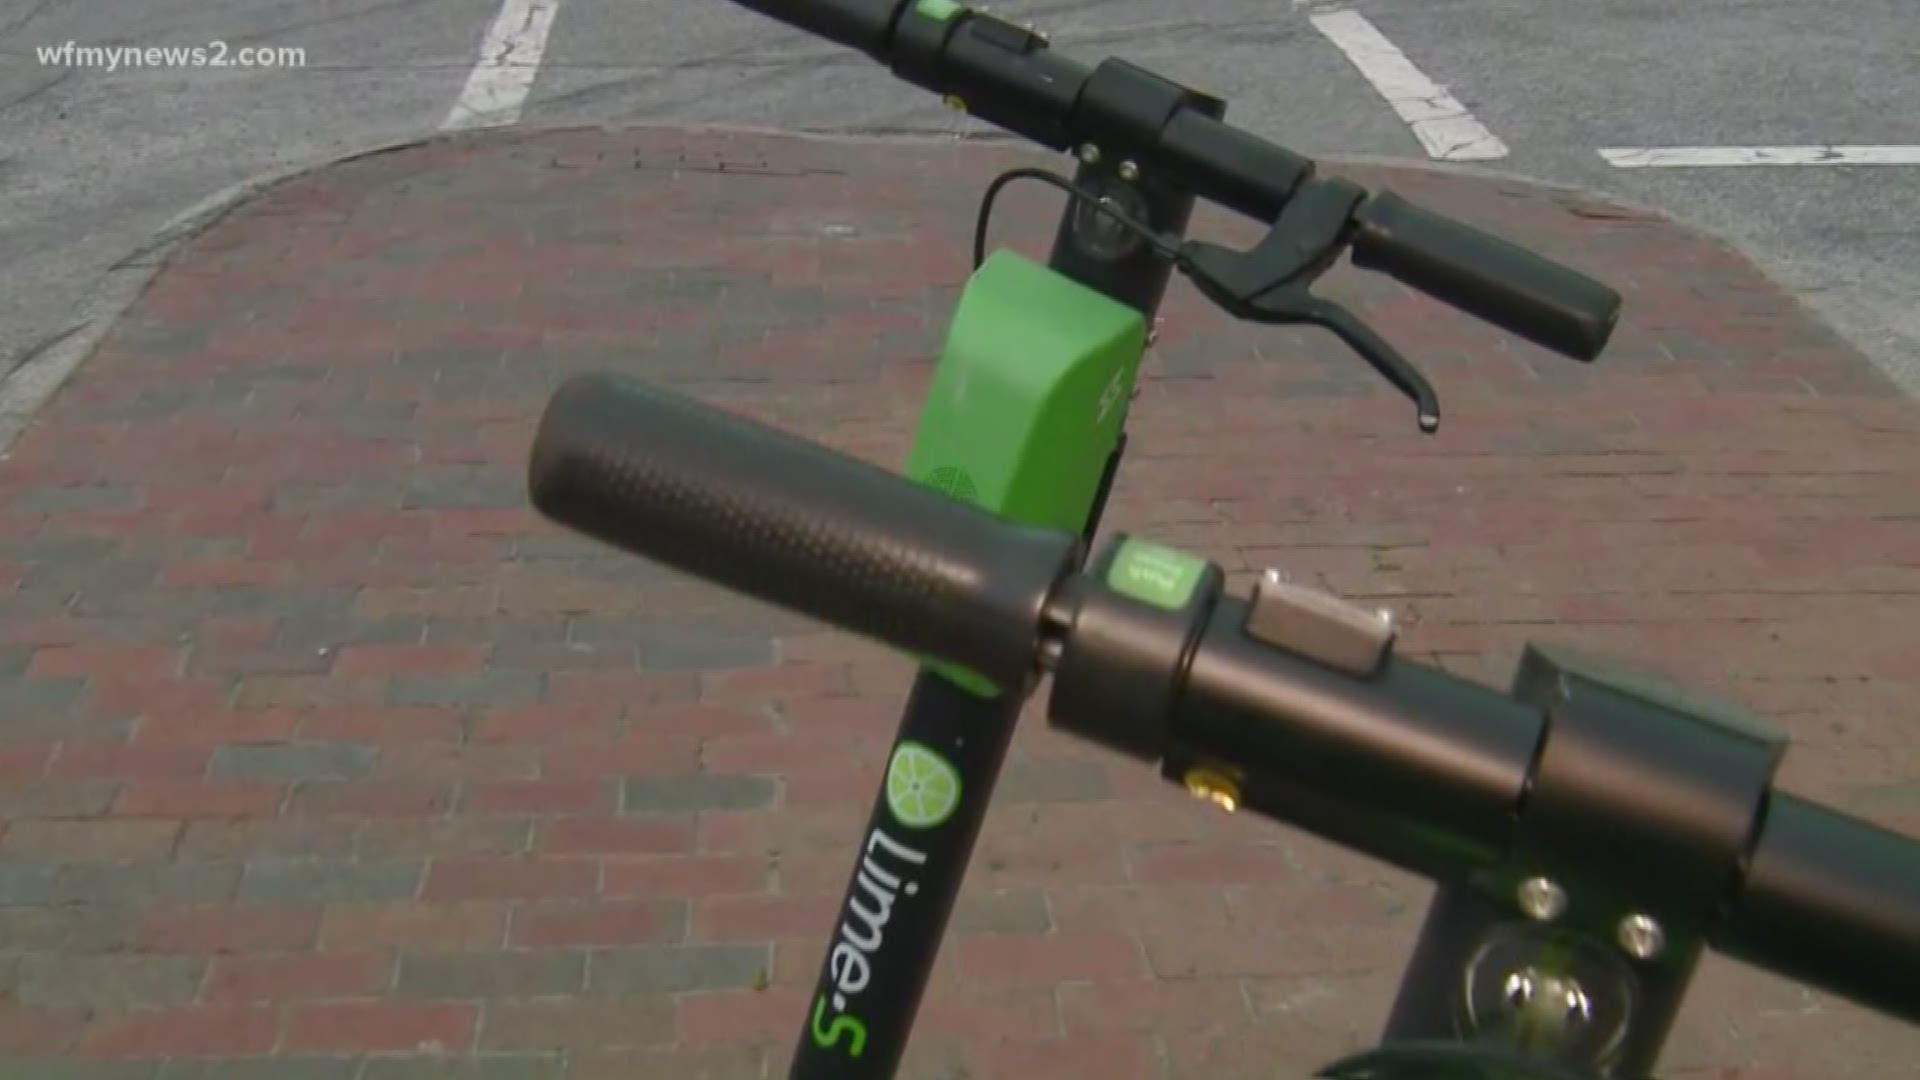 Lime is working on software, product, and hardware solutions to address potential drunk riding issues.